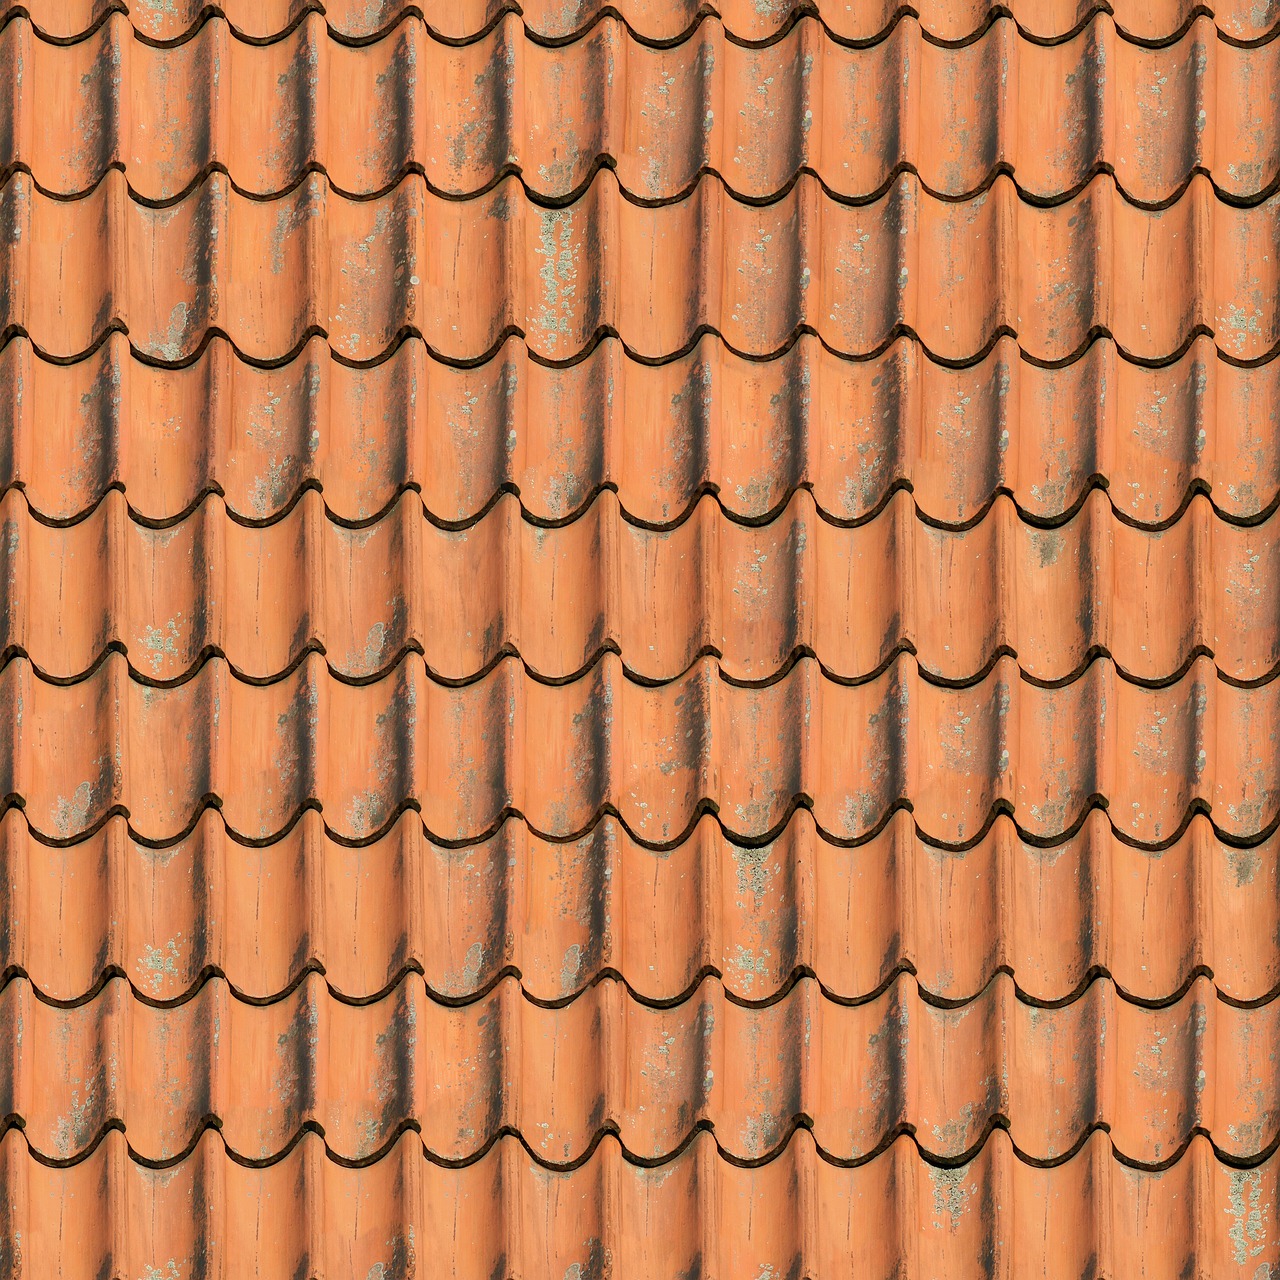 a close up view of a tiled roof, a digital rendering, shutterstock, baroque, seamless game texture, orange color, sao paulo, phone photo